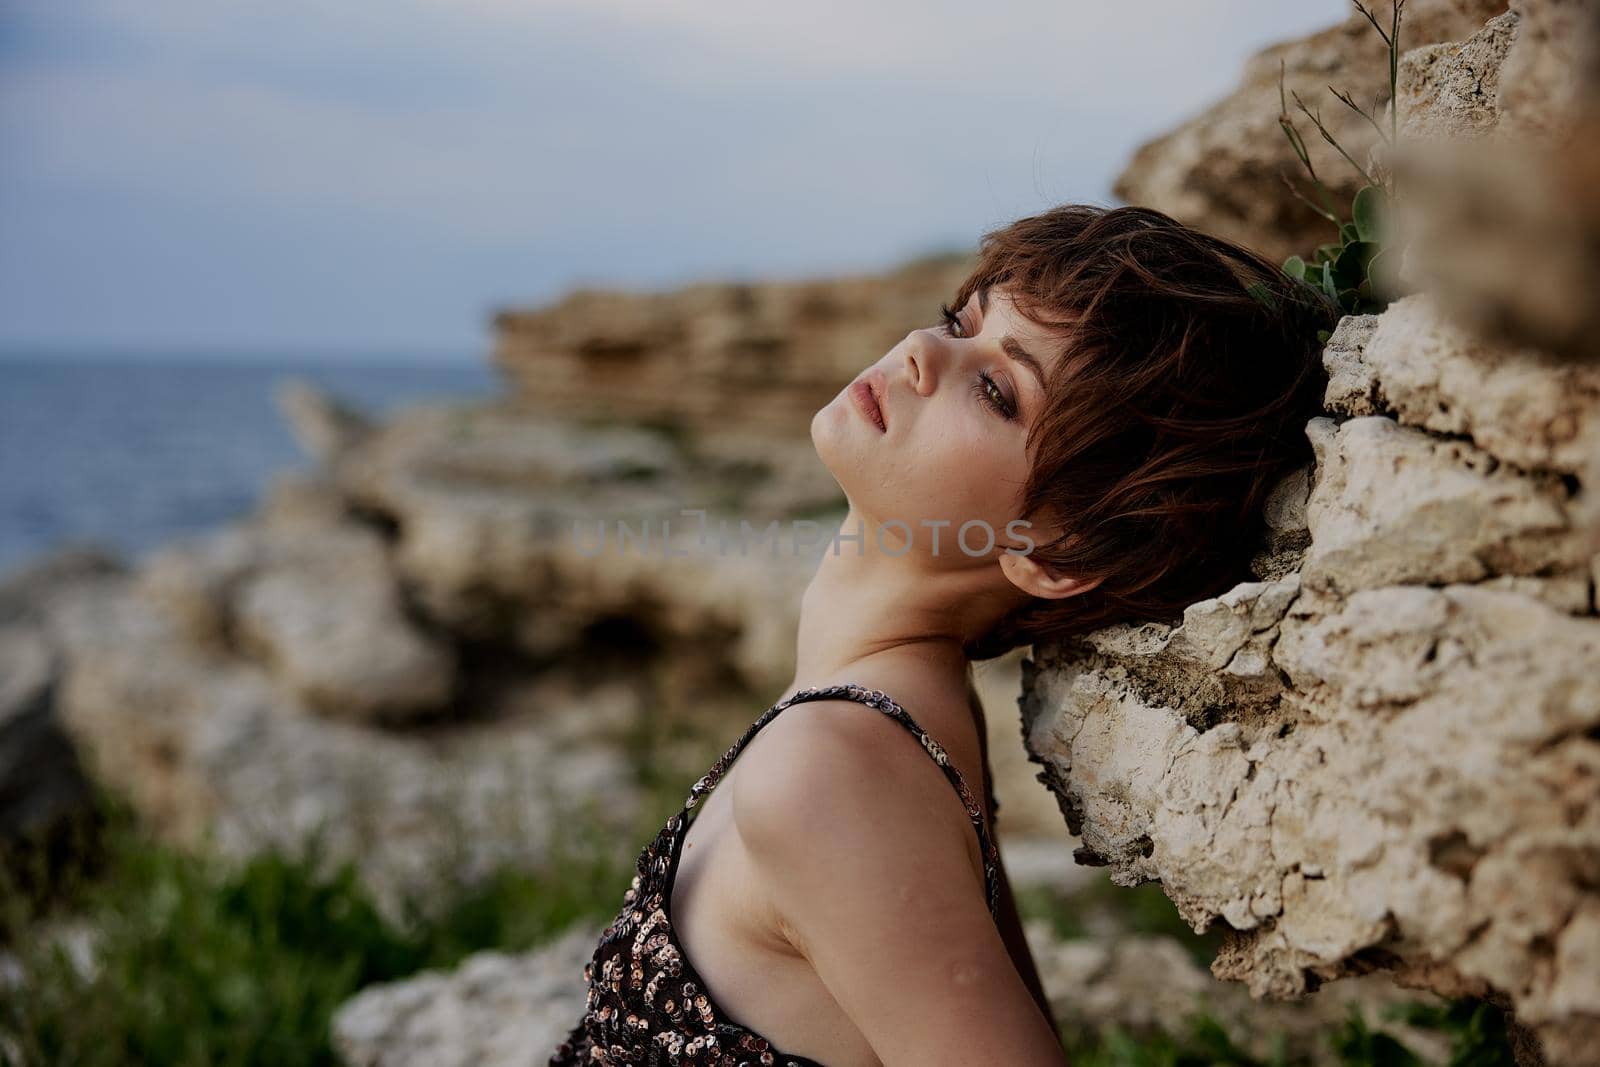 woman with makeup in dress on nature rocks landscape Lifestyle unaltered by SHOTPRIME